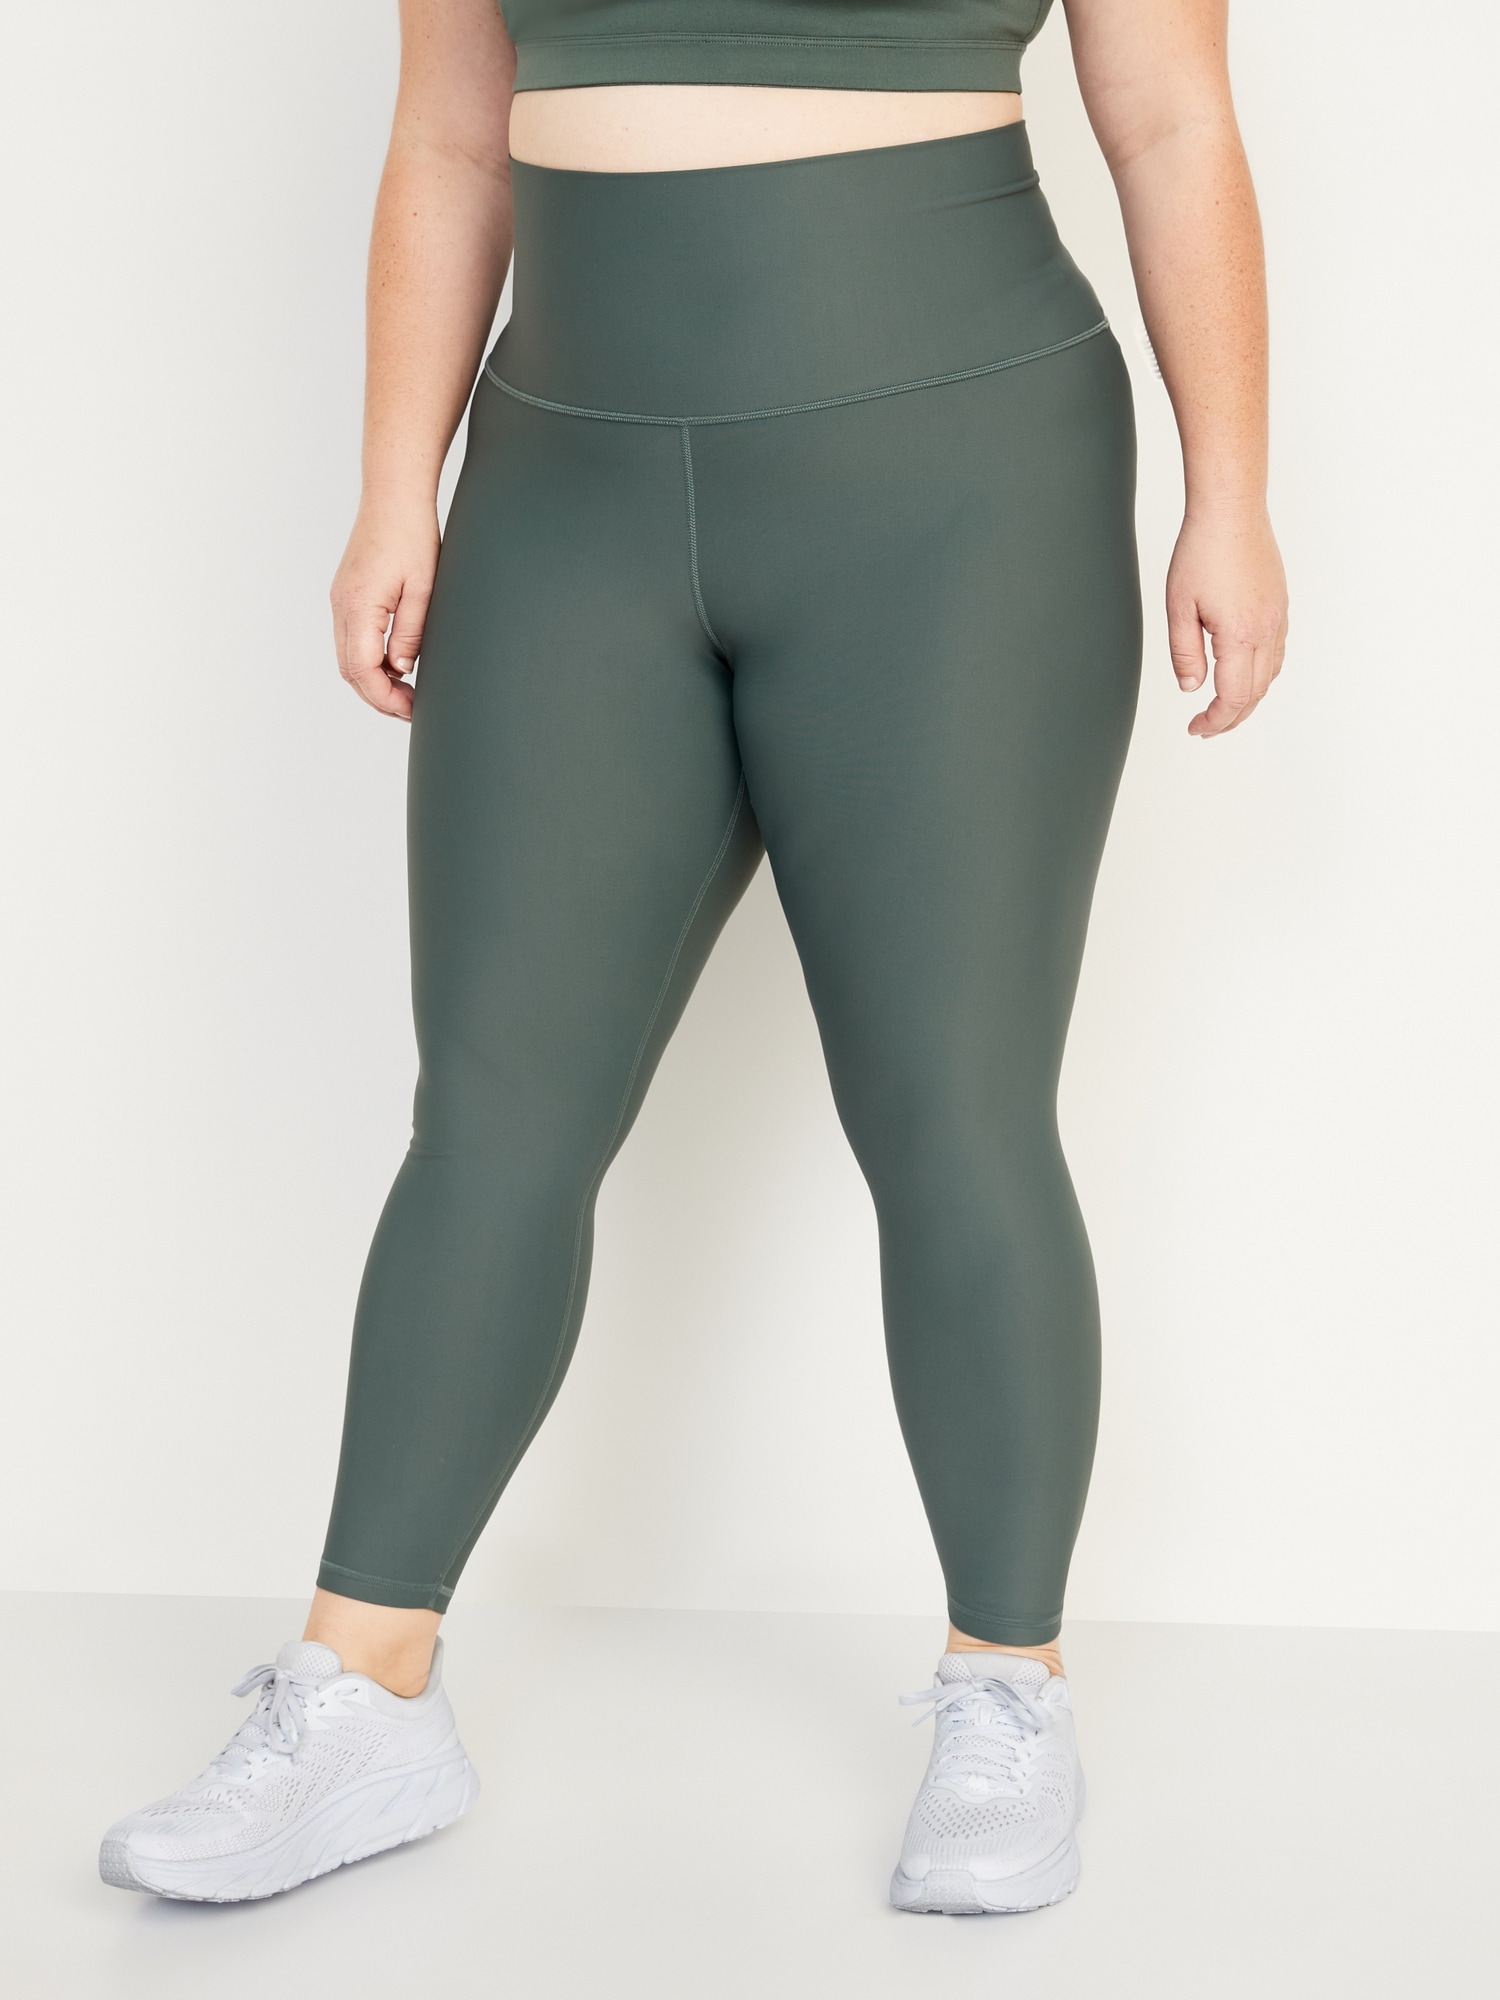 Extra High-Waisted PowerSoft 7/8 Leggings